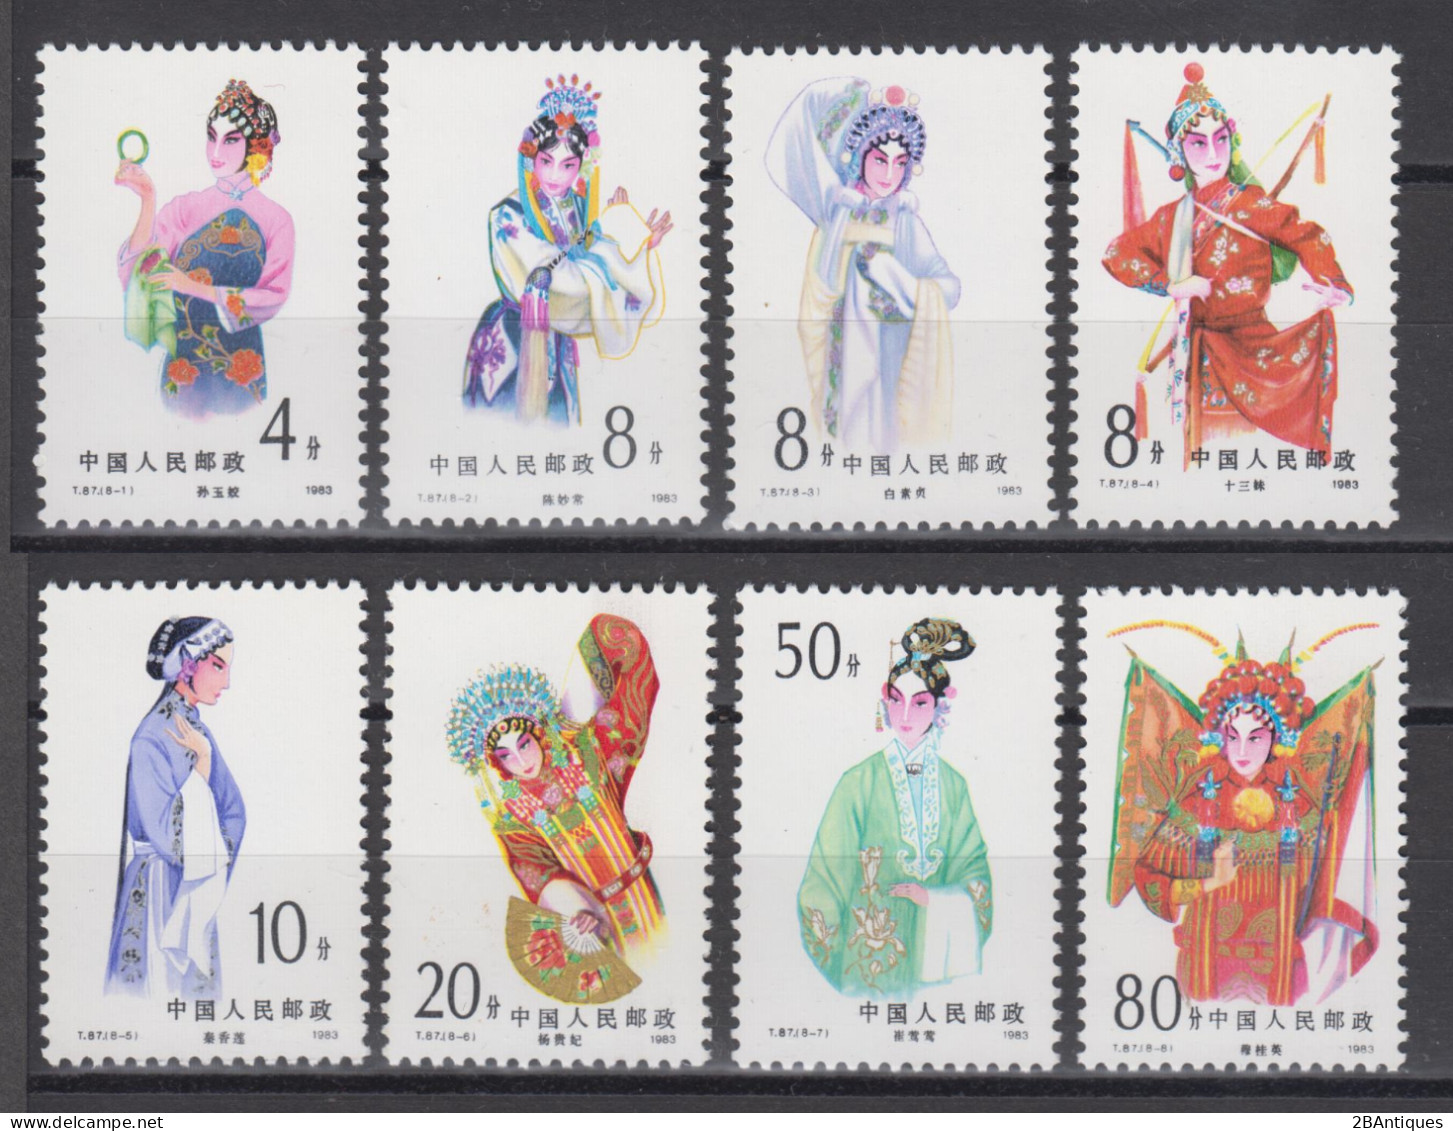 PR CHINA 1983 - Female Roles In Beijing Opera MNH** OG XF - Unused Stamps